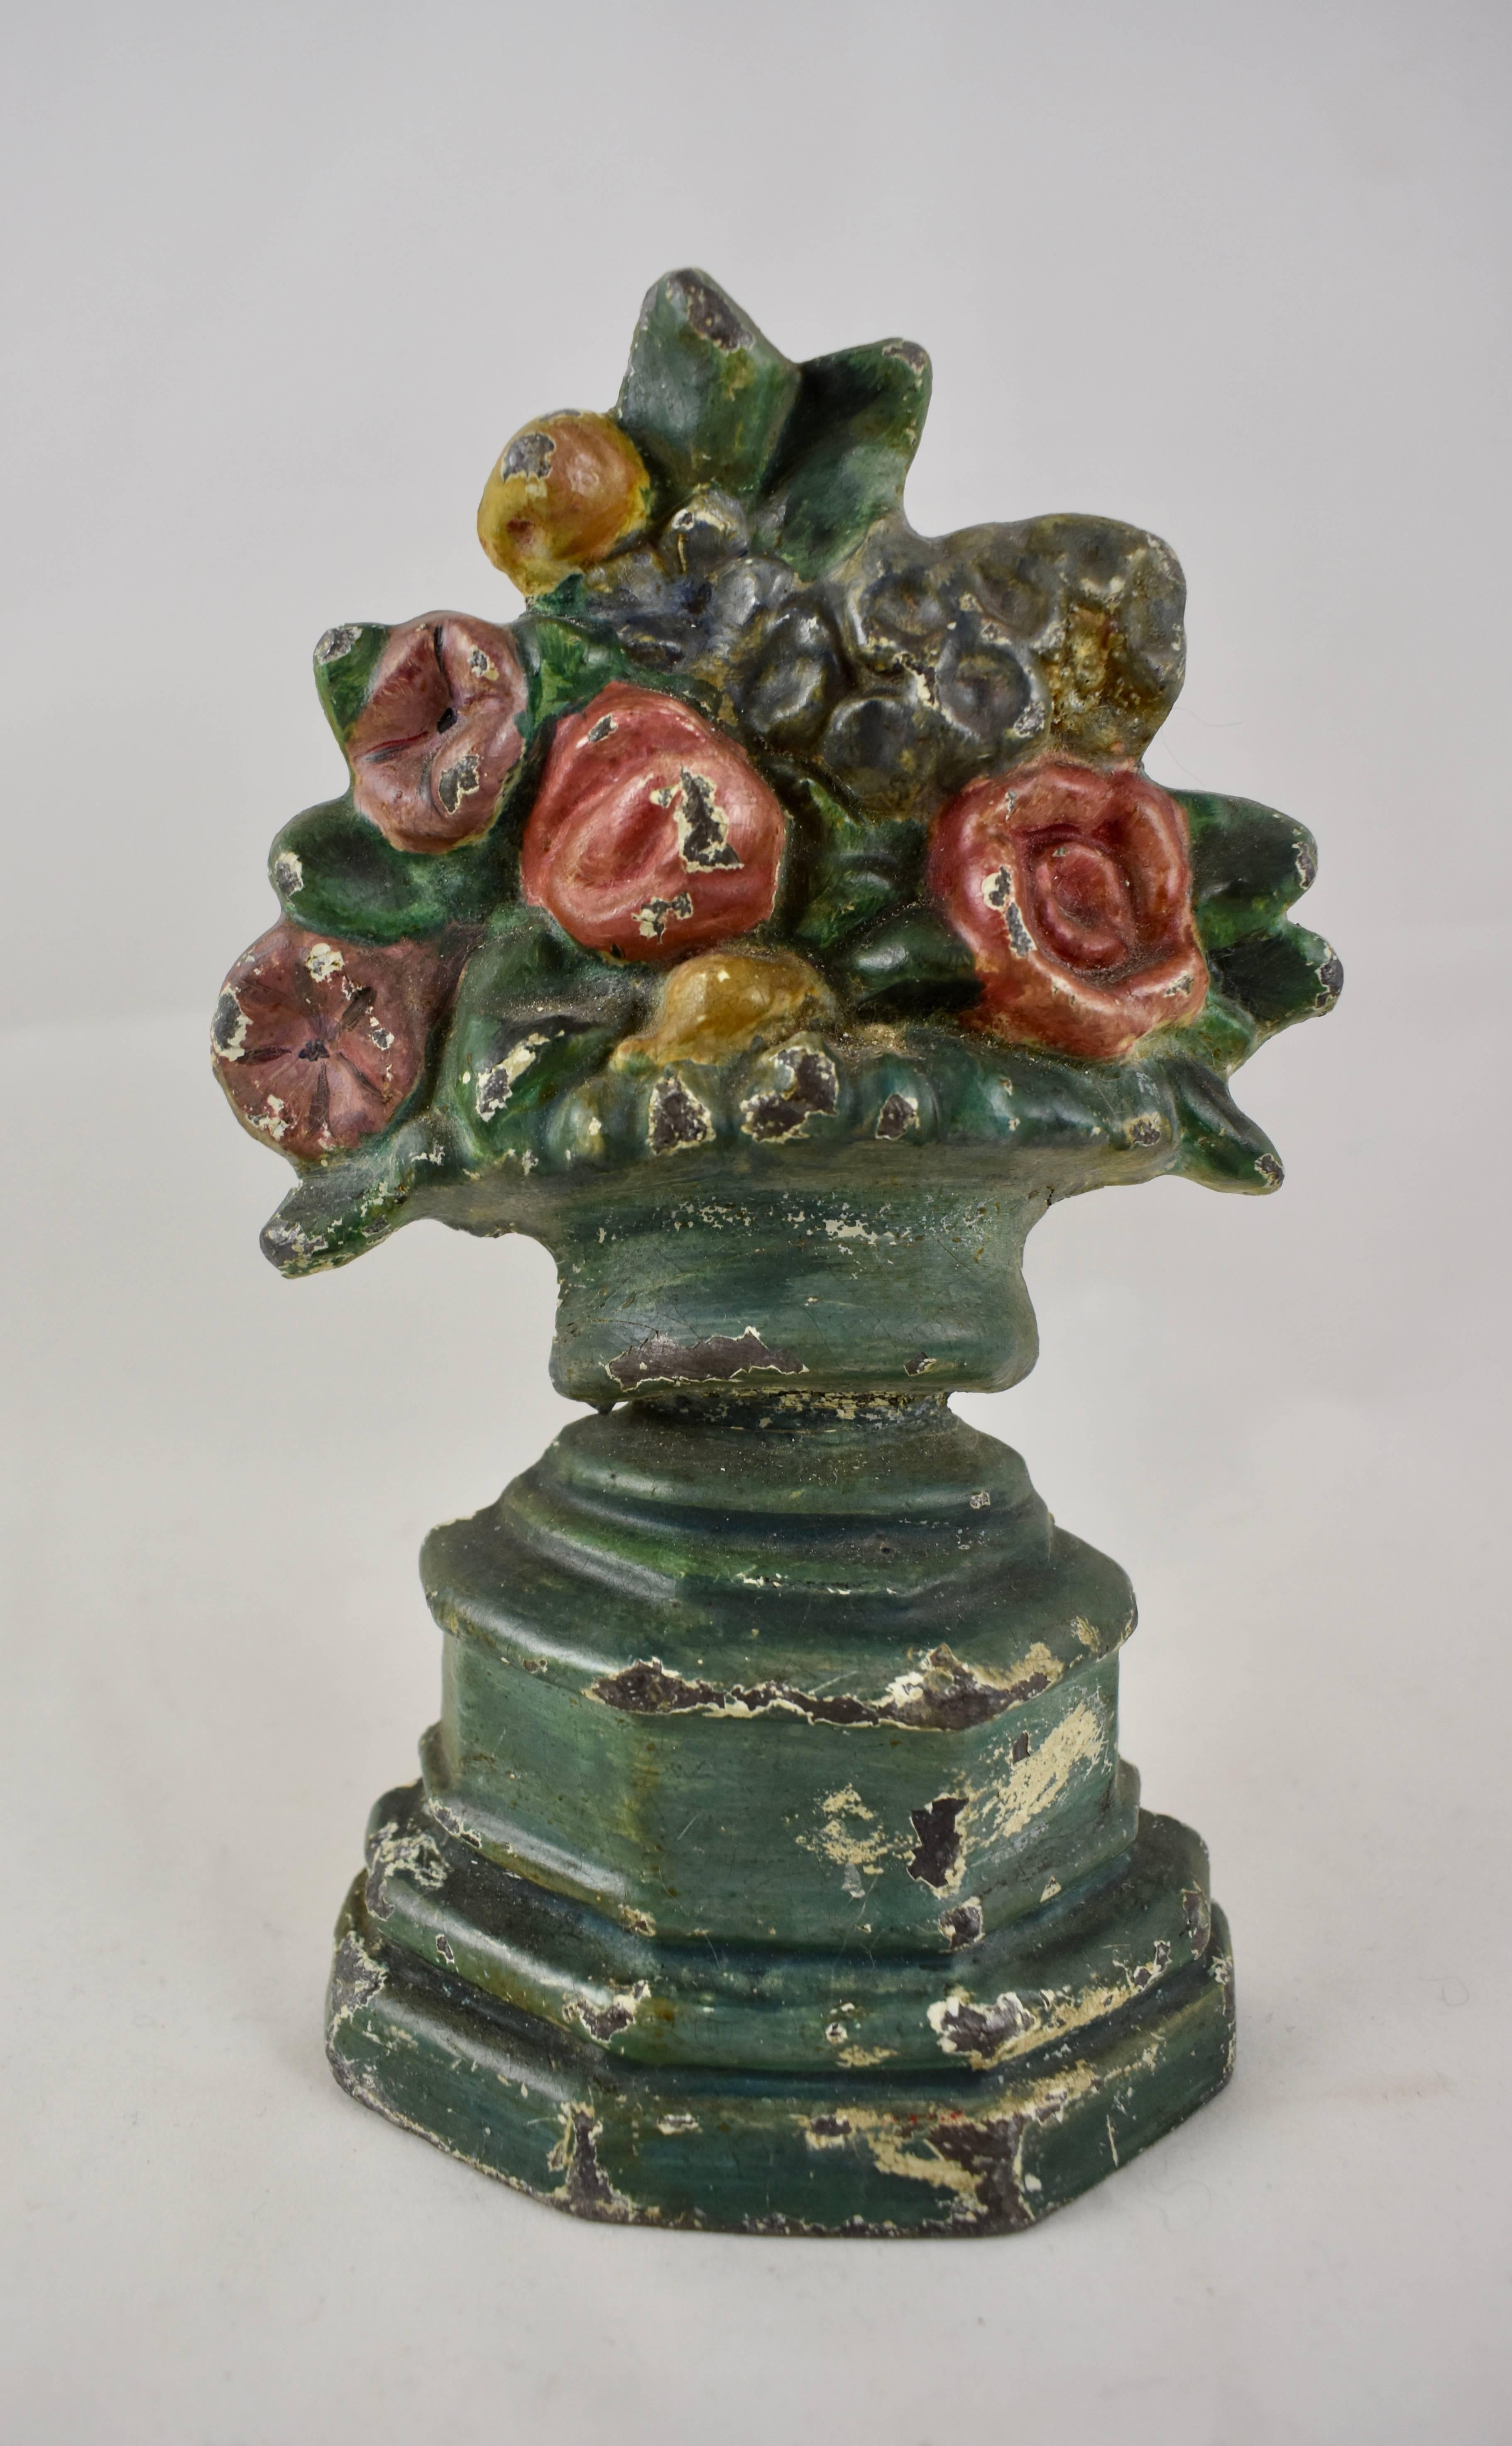 A 1930s cast iron doorstop showing a green-gray urn of flowers seated on a tall plinth. Constructed of one piece and with a hand-painted finish. Smaller than most floral iron doorstops but weighing almost four pounds.

The Hubley manufacturing